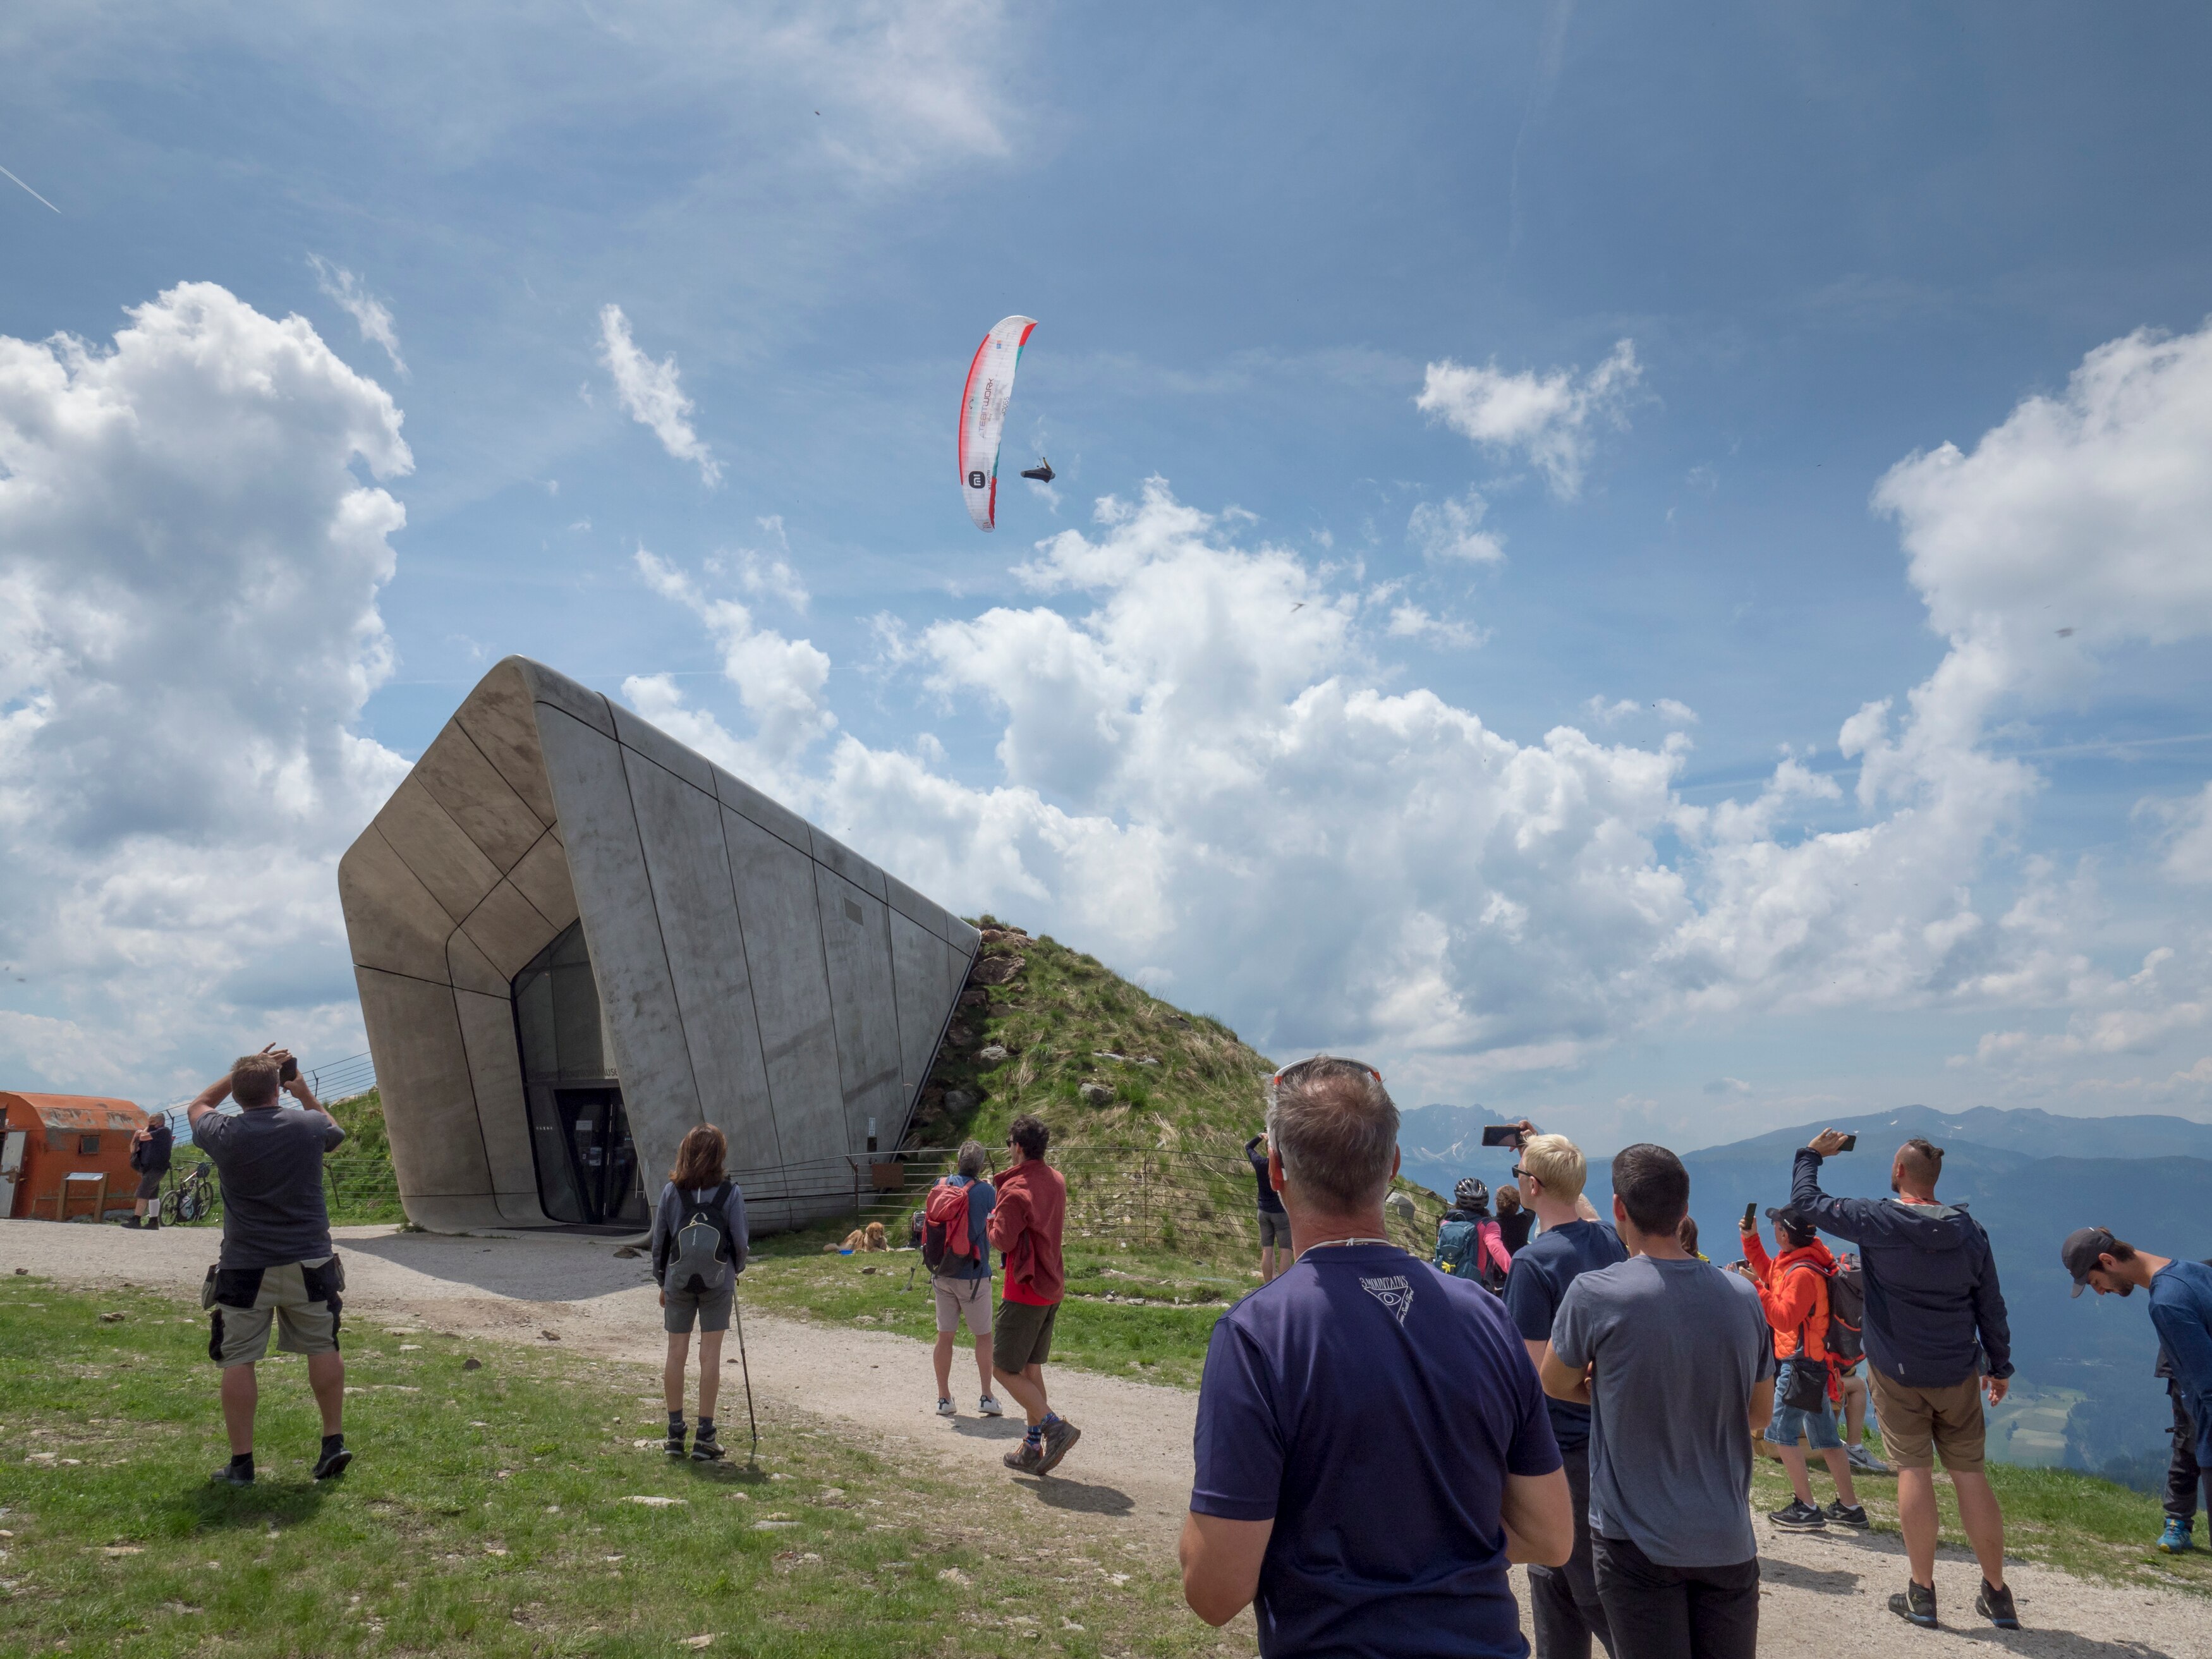 Chrigel Maurer (SUI1) performs during the Red Bull X-Alps 2021 at Kronplatz, Italy on June 28, 2021